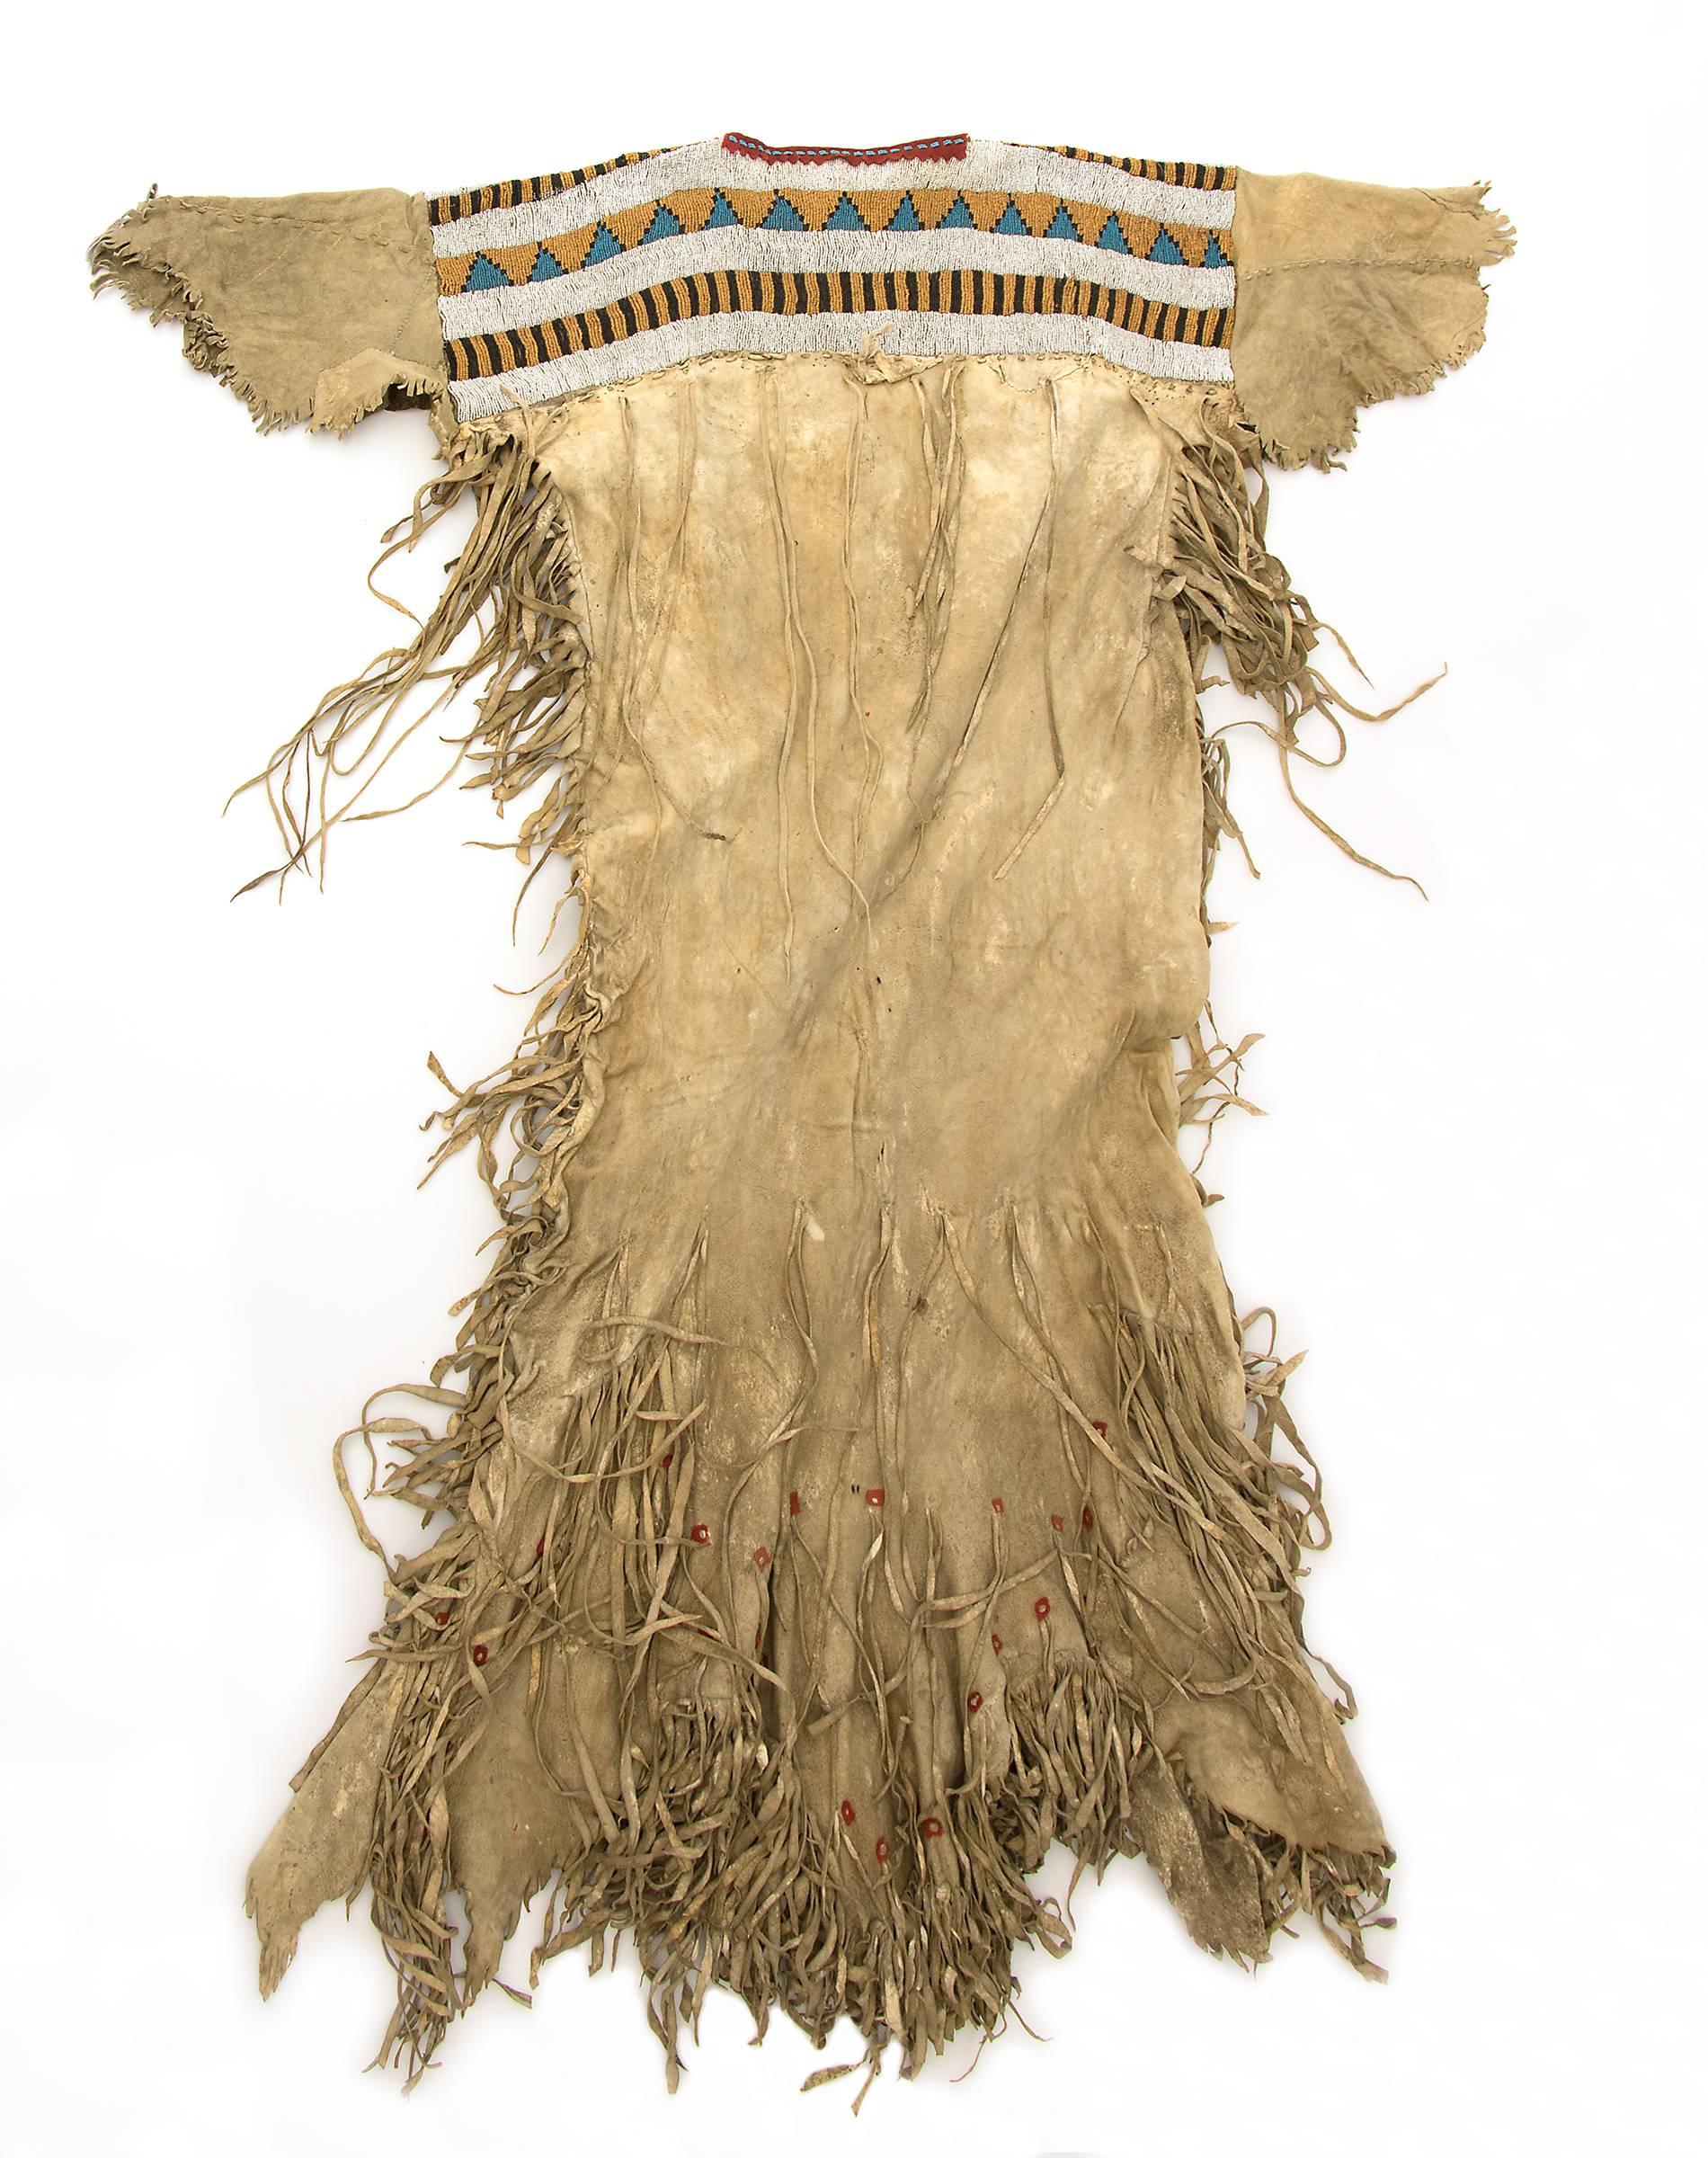 A Blackfeet (Northern Plains American Indian) beaded dress from the classic period (Pre-Reservation era). Constructed of Native tanned hide Pony beads, Real beads and Seed beads with red Cochineal-Lac dyed trade cloth. The Blackfeet/Blackfoot tribe,